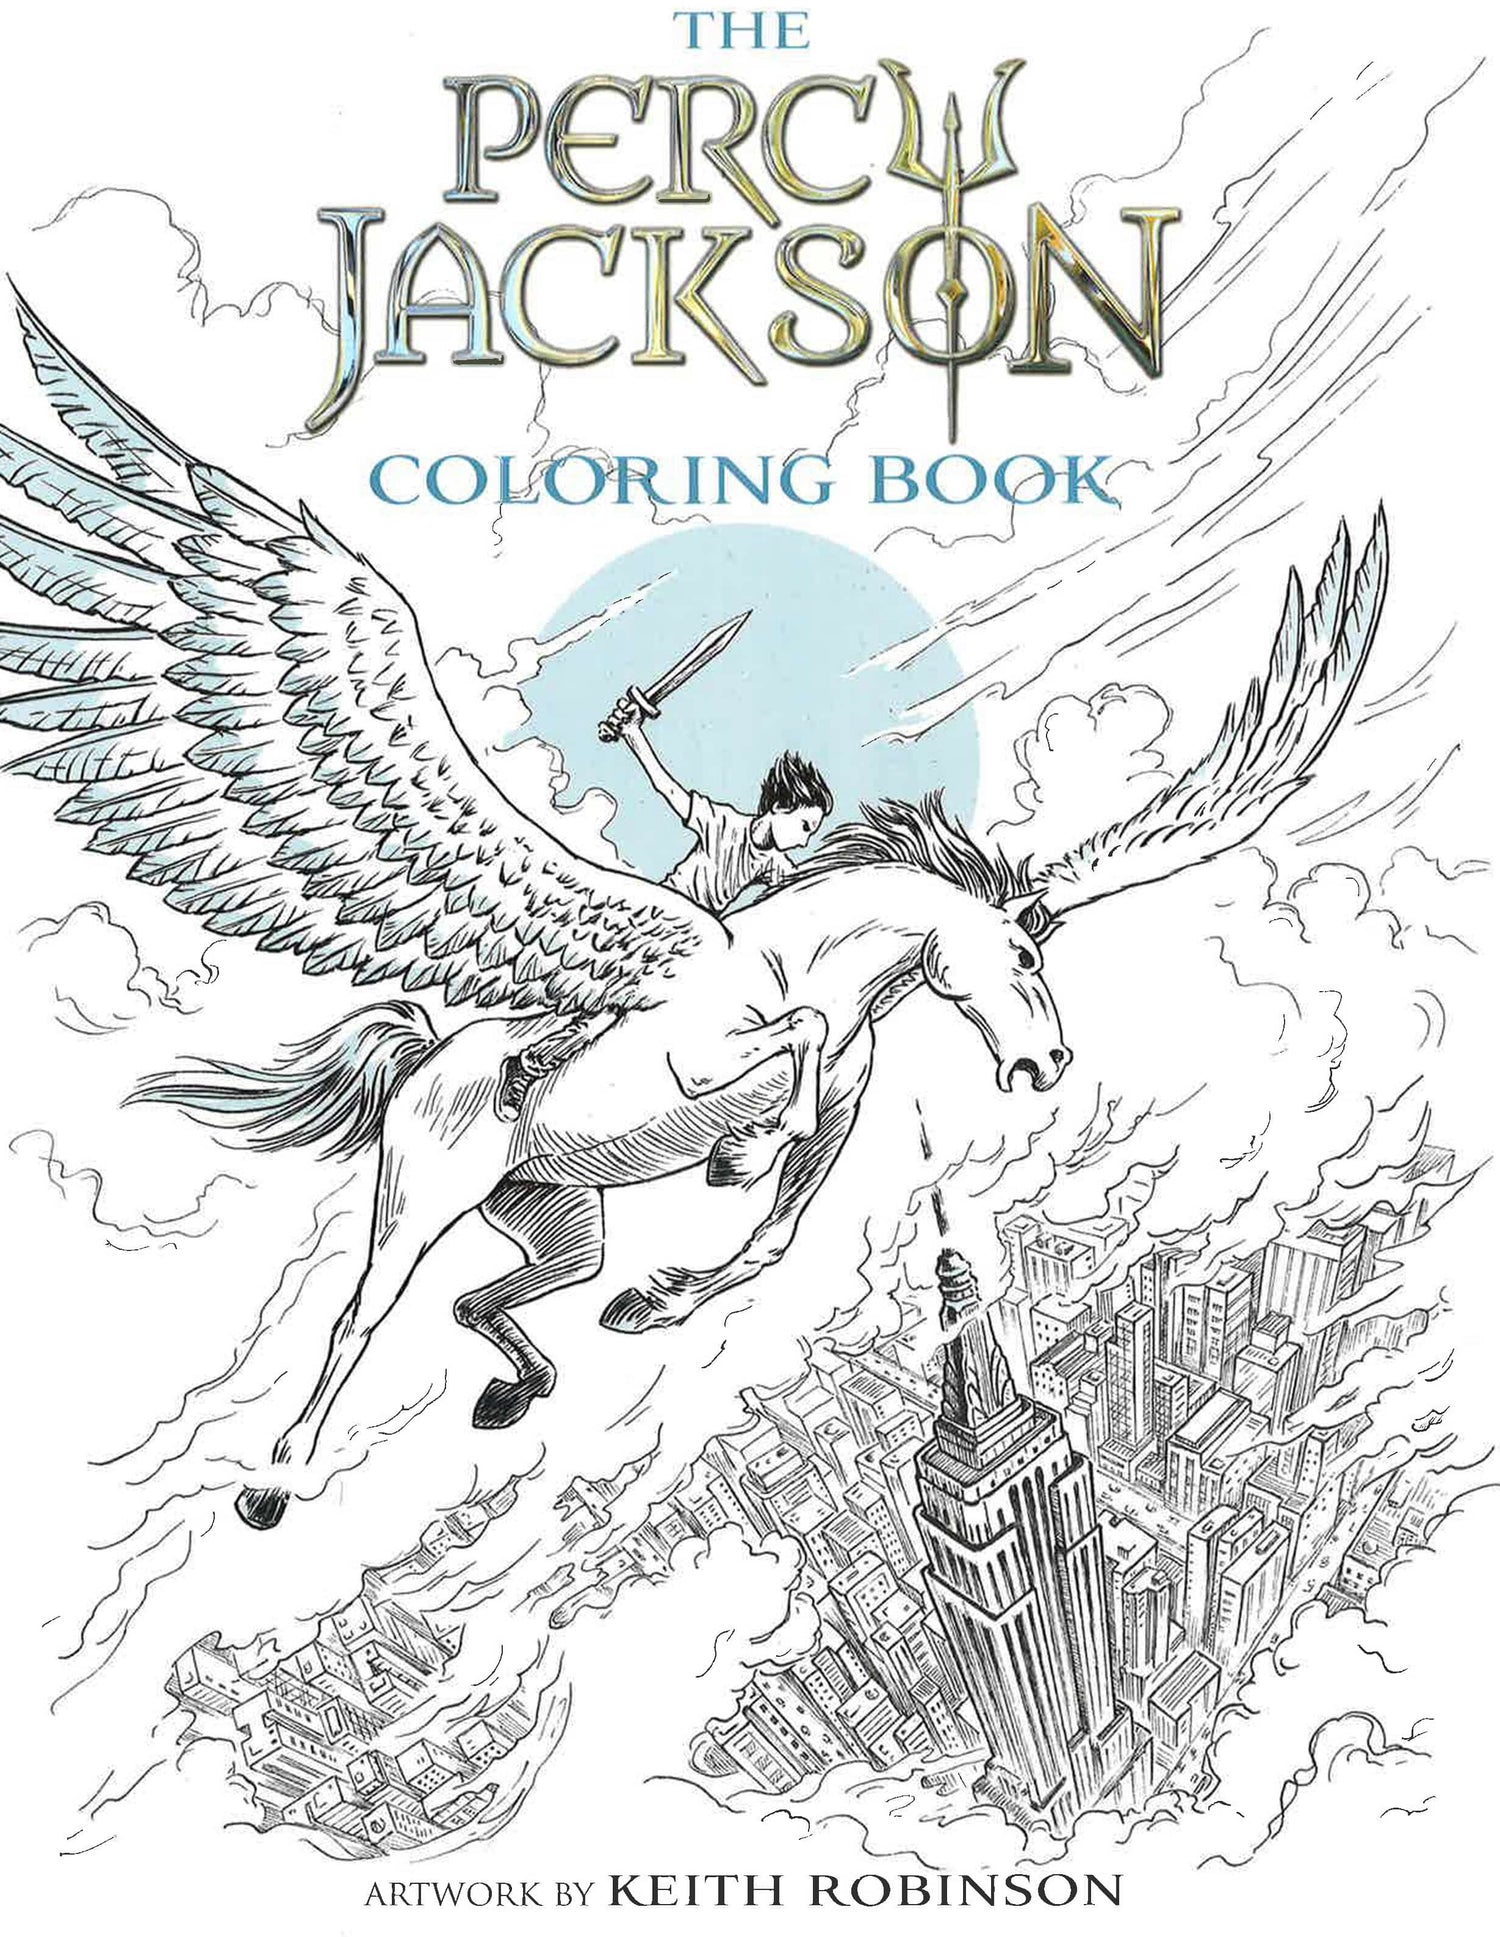 The Percy Jackson Colouring Book